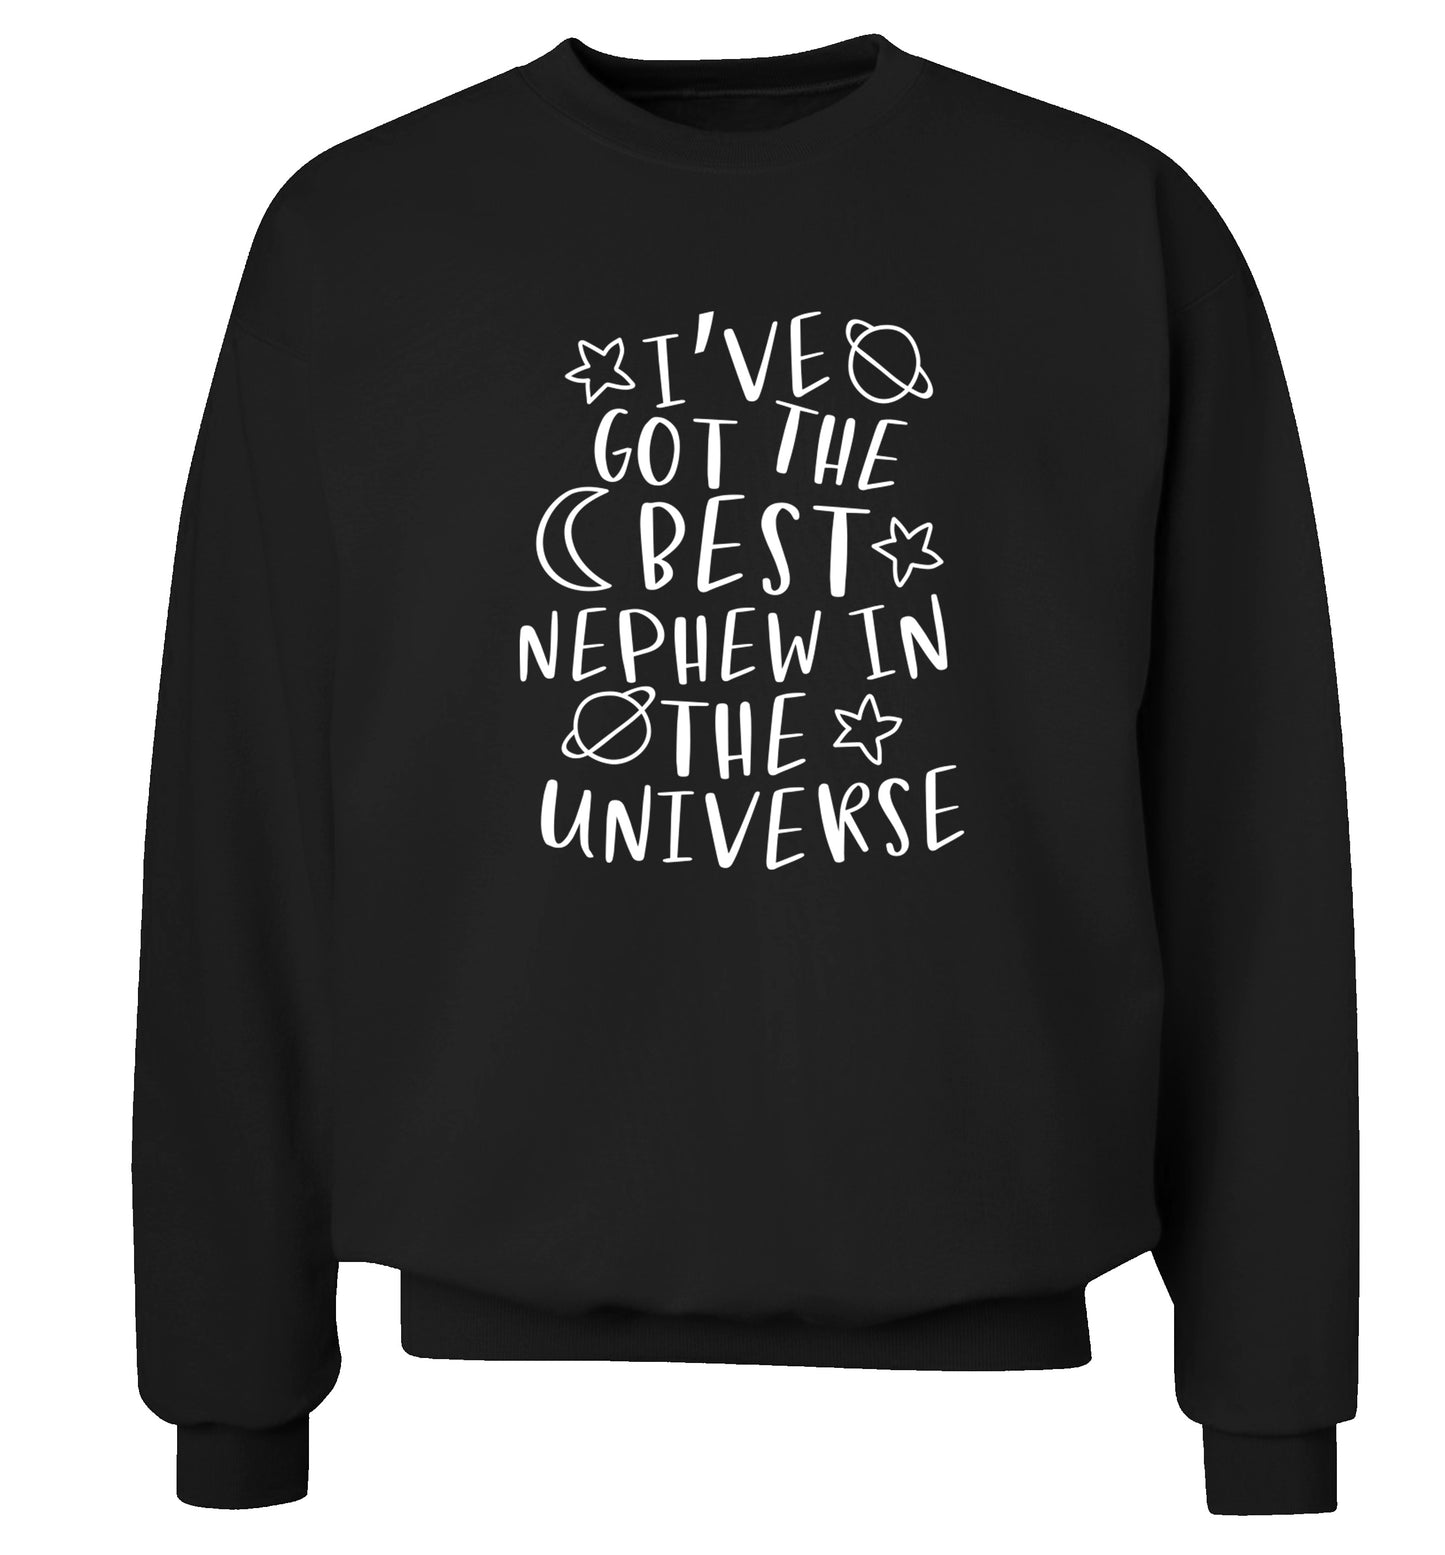 I've got the best nephew in the universe Adult's unisex black Sweater 2XL